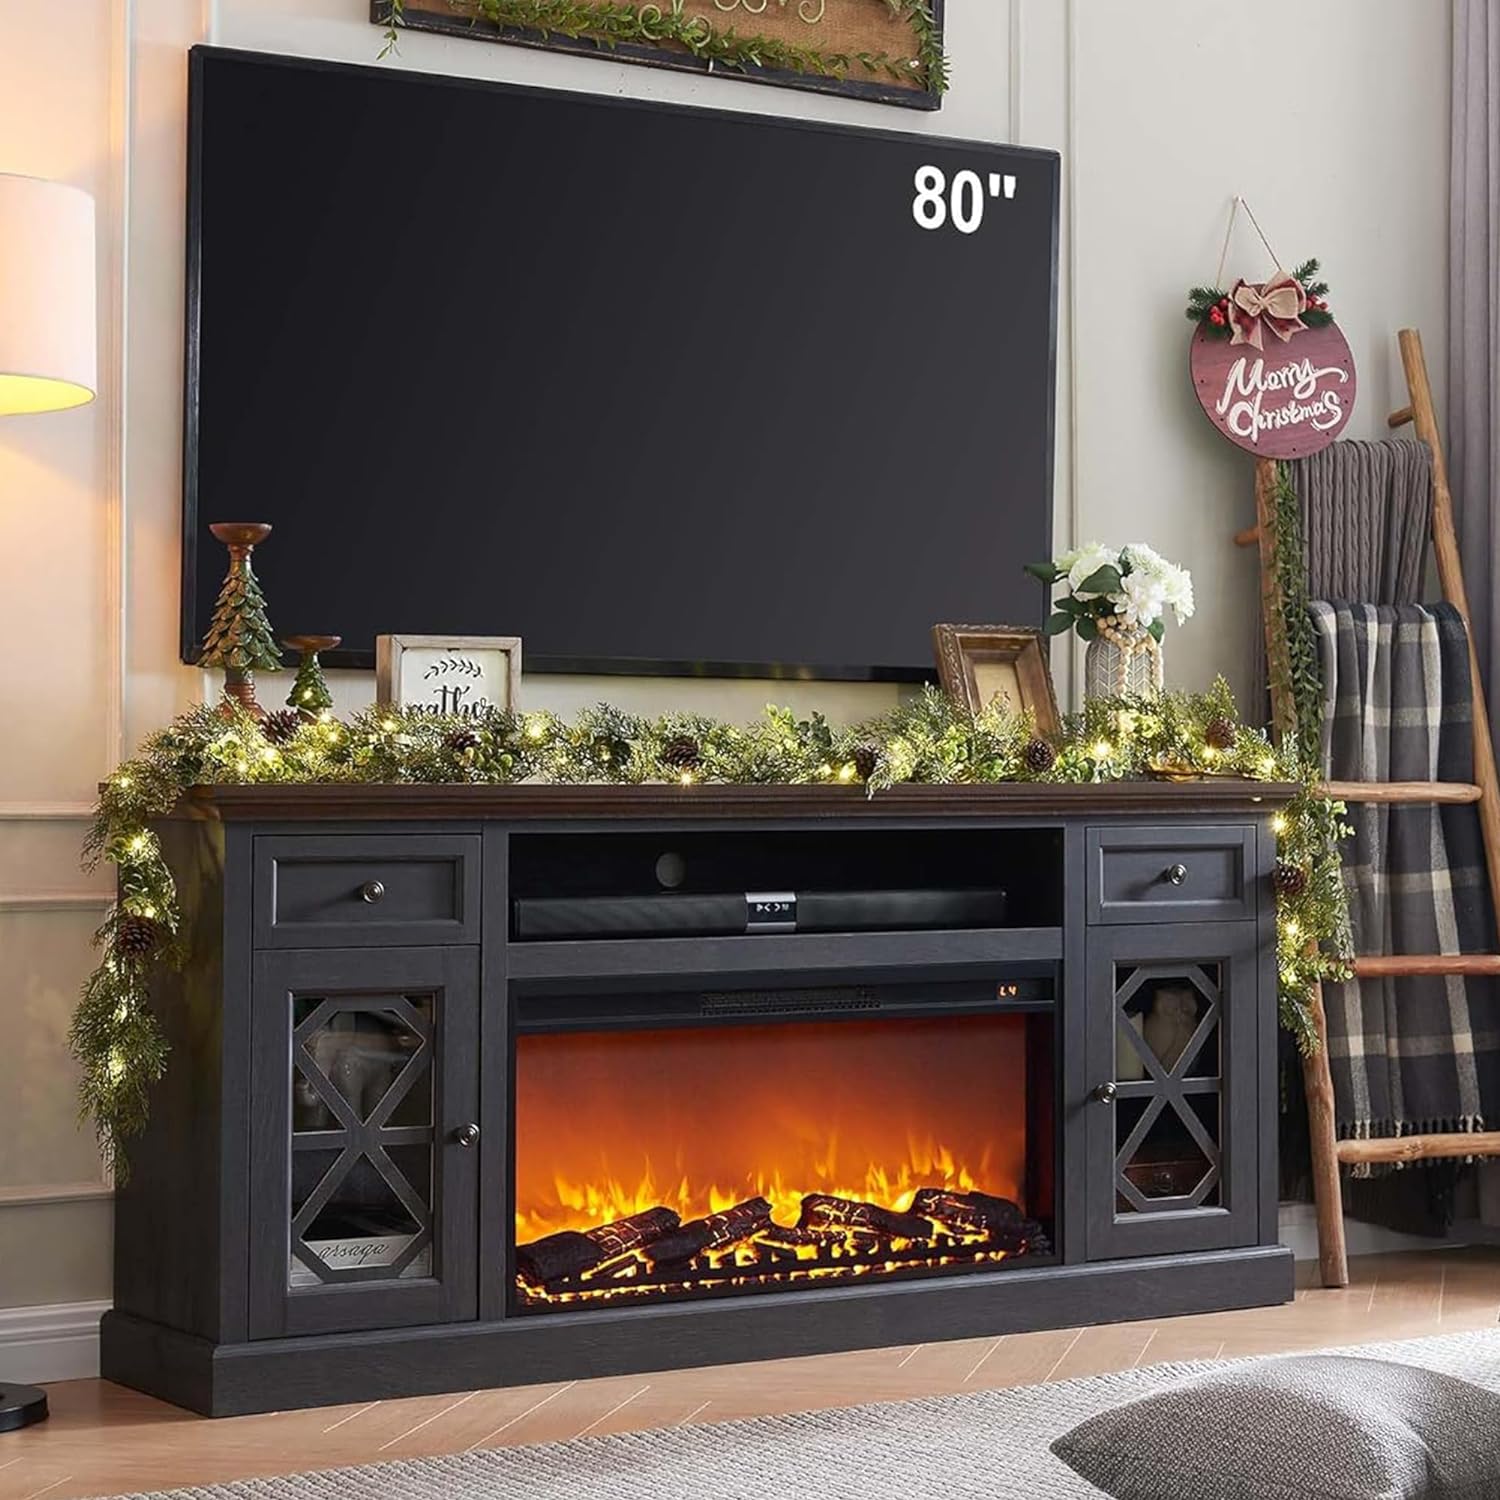 Farmhouse Fireplace TV Stand with 36 Electric Fireplace for 80 Inch TVs, 31 Tall Entertainment Center w/Drawer & Diamond Panel Door, Highboy Media Console for Living Room, 70inch, Dark Grey